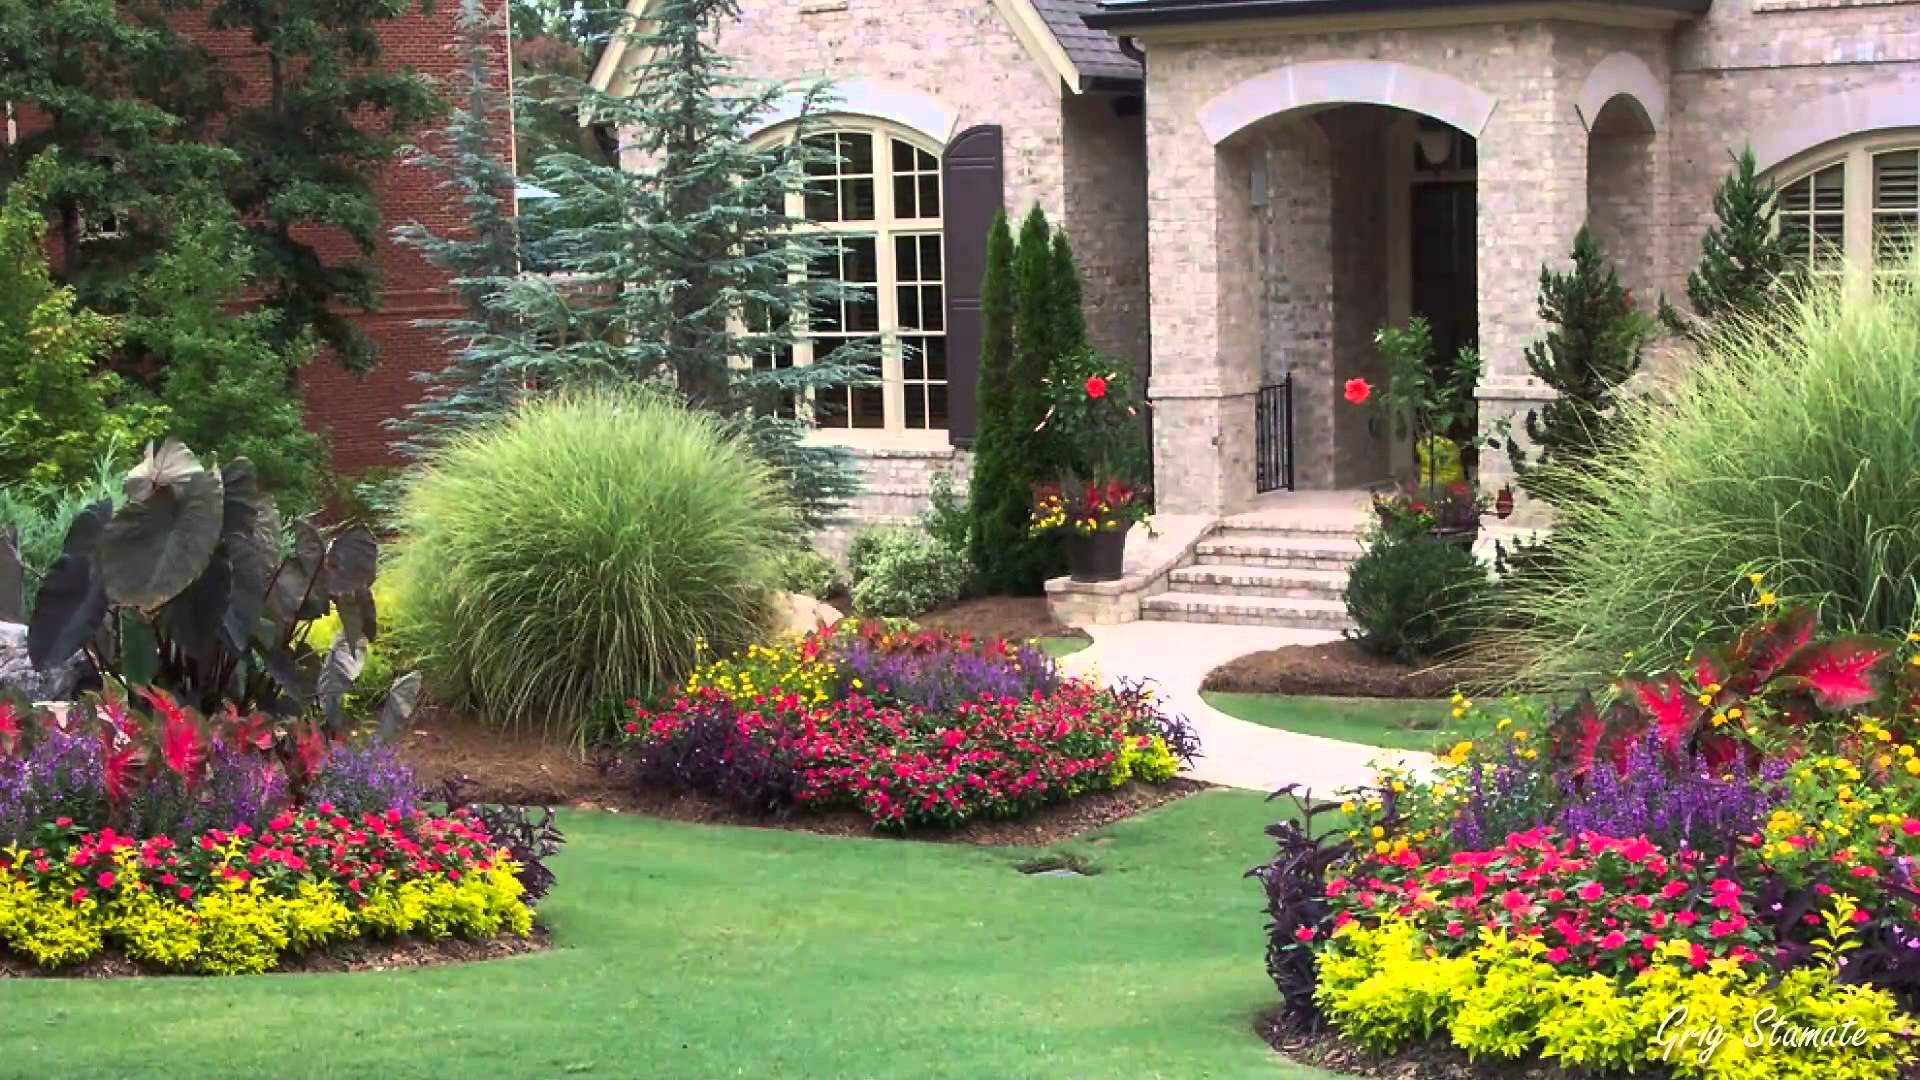 Front Yard Flowers Improve Your Home's Curb Appeal - YouTube